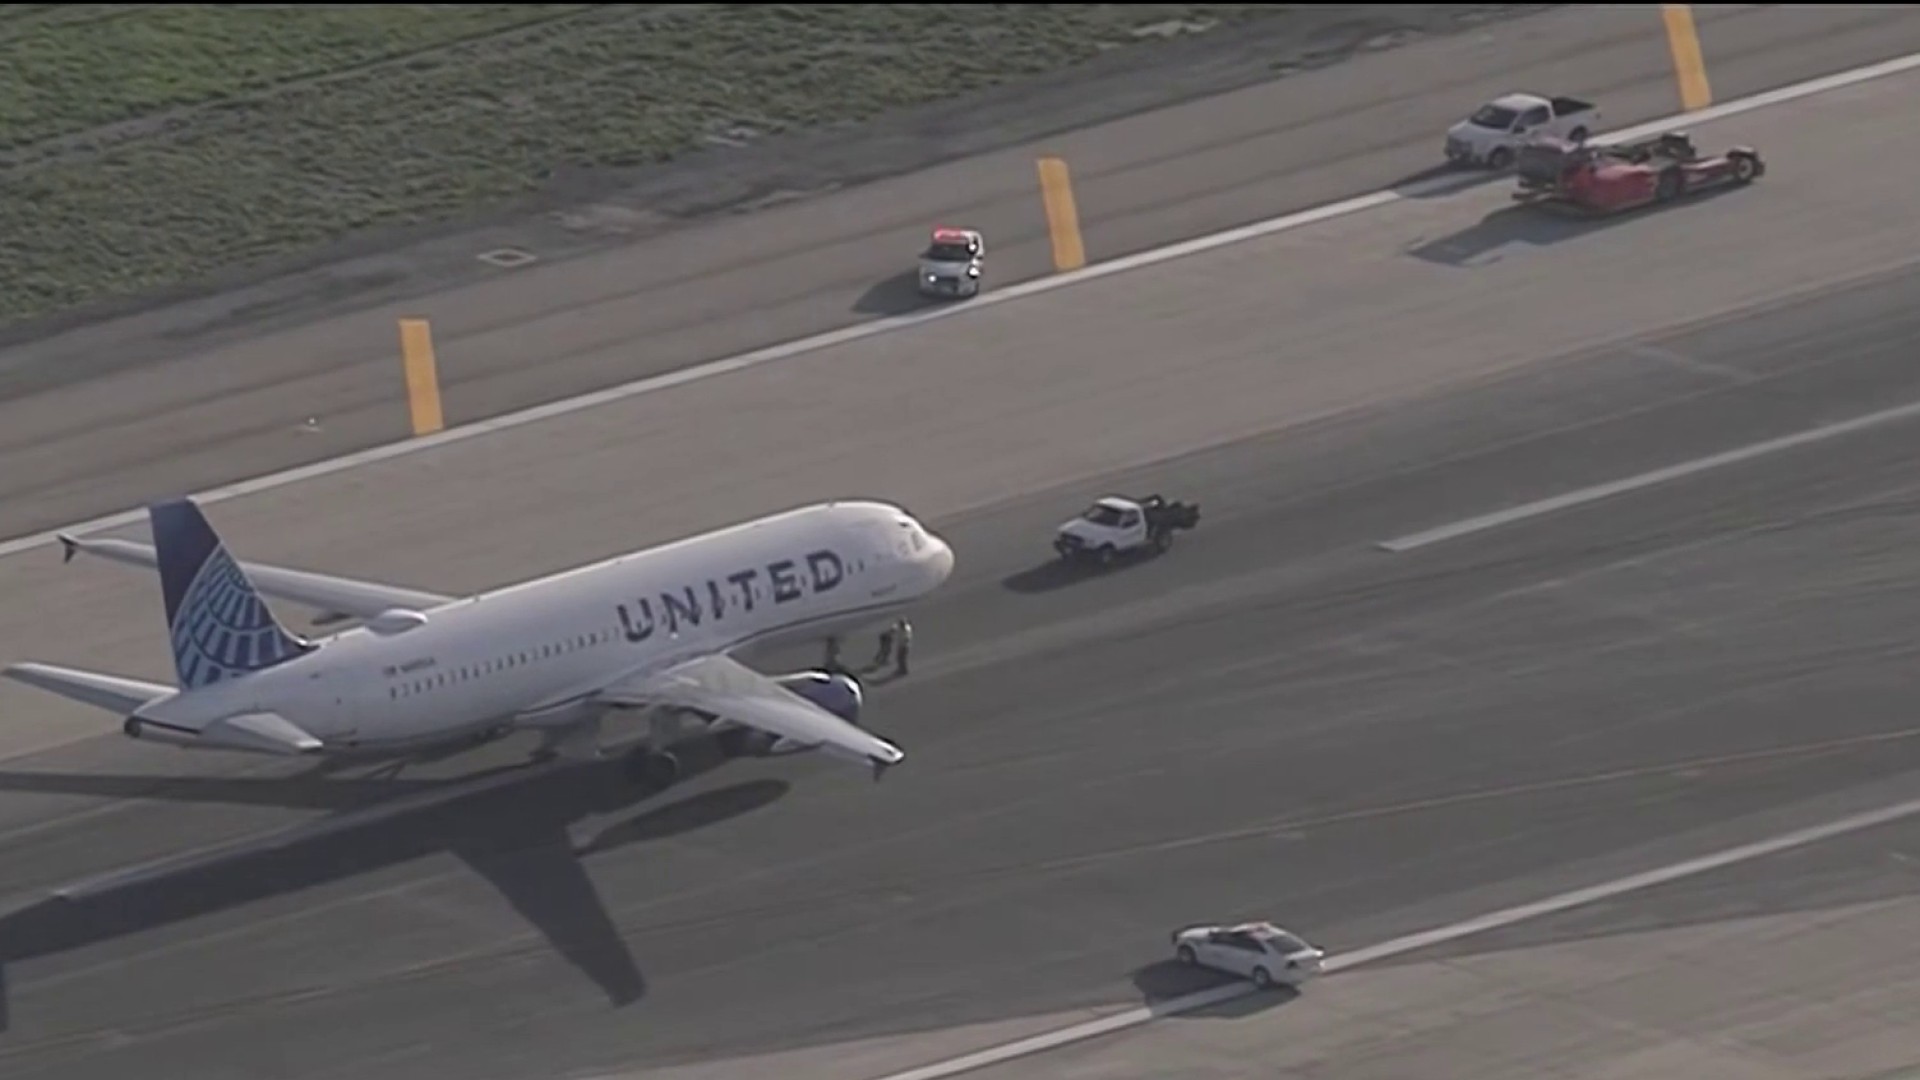 United flight 821 headed to Mexico City from SFO makes emergency landing at  LAX due to hydraulic failure: officials - ABC7 San Francisco